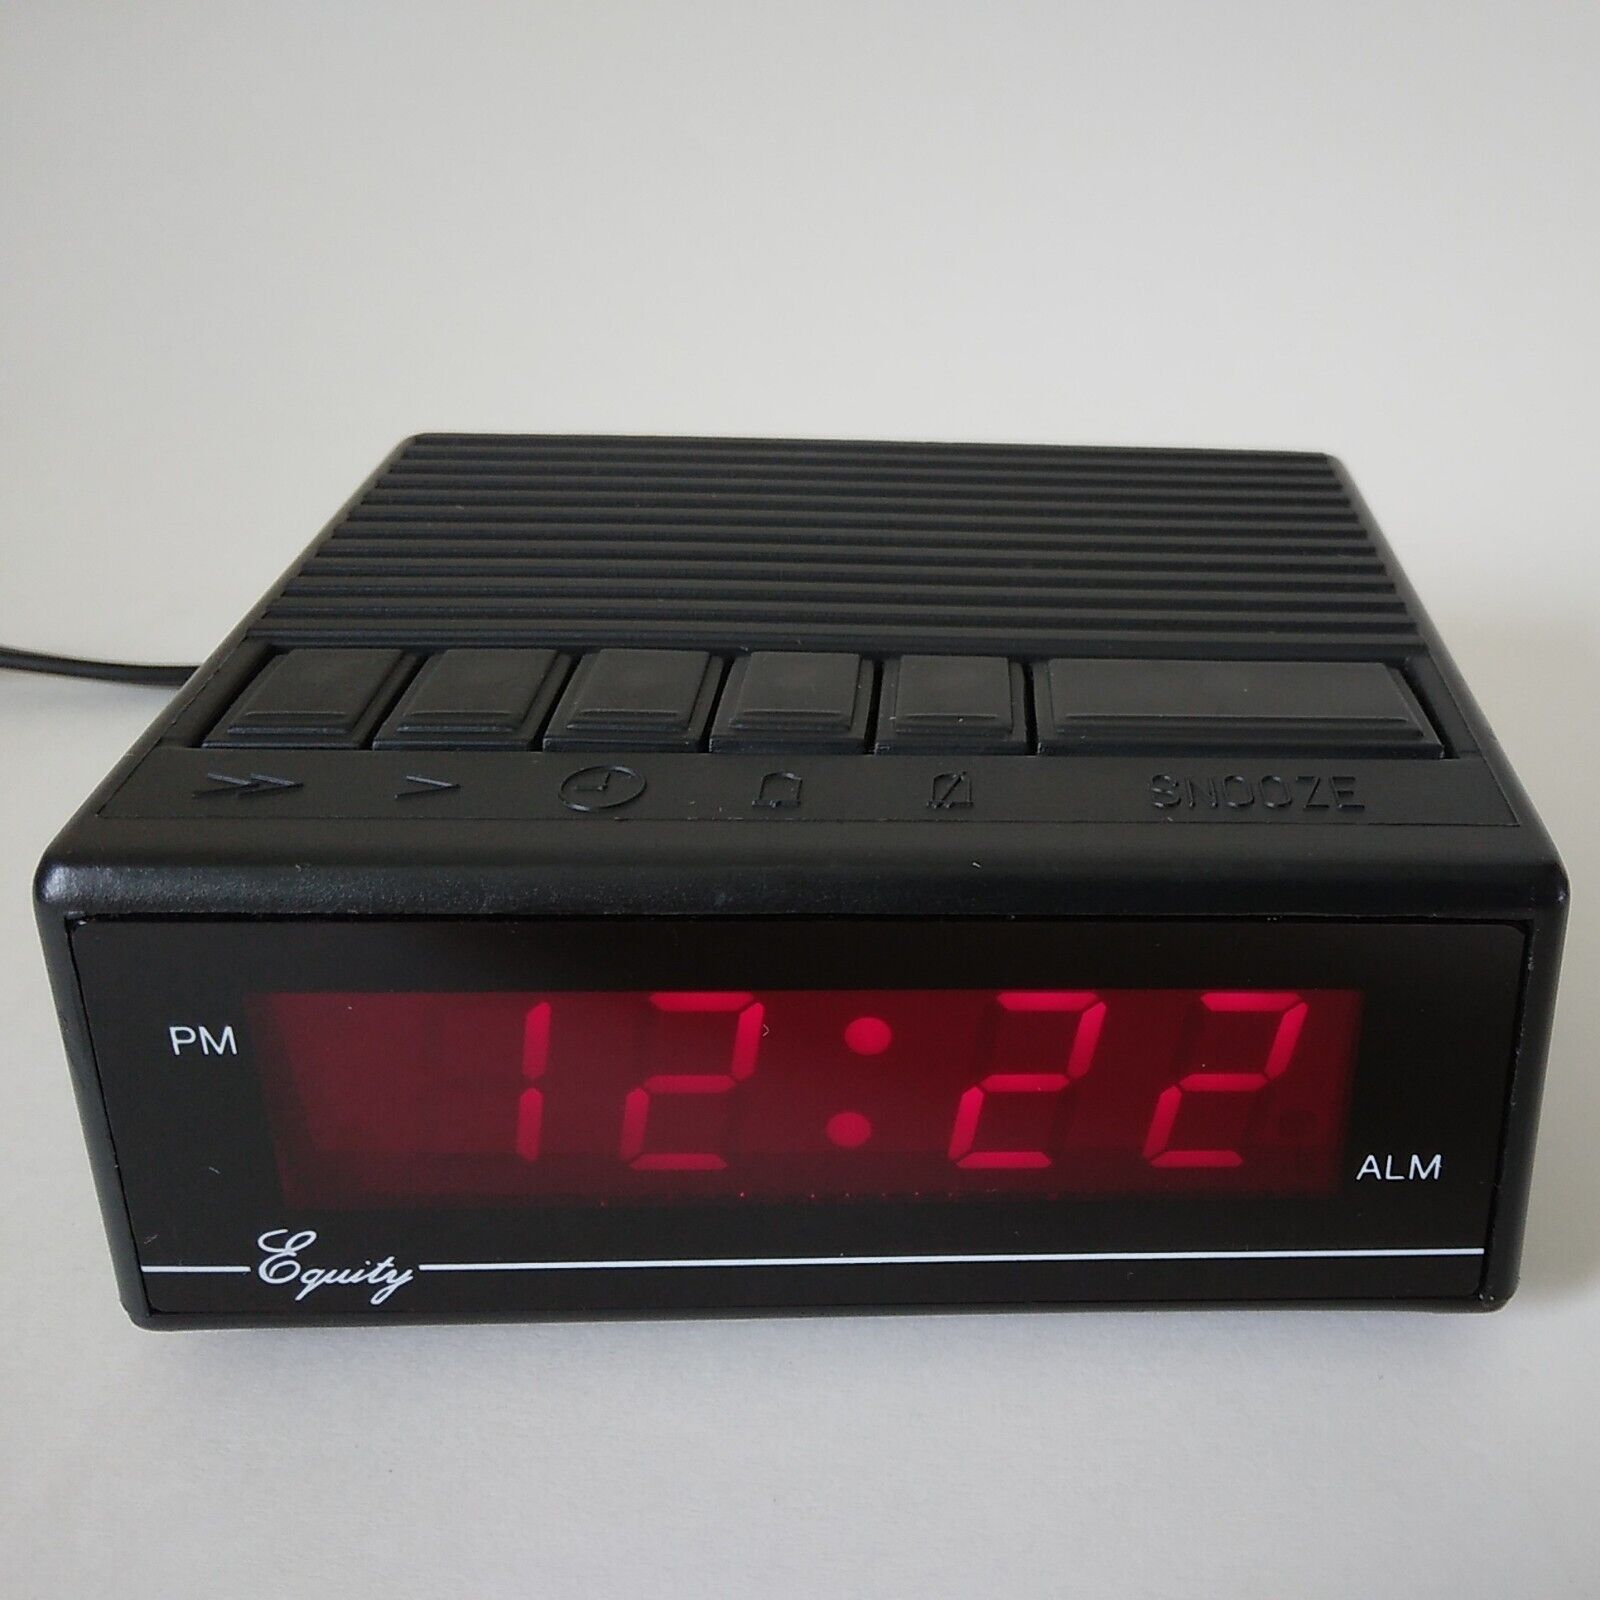 Equity Model: 9109A Mini Alarm Clock-Corded/Battery Backup-Tested/Working 